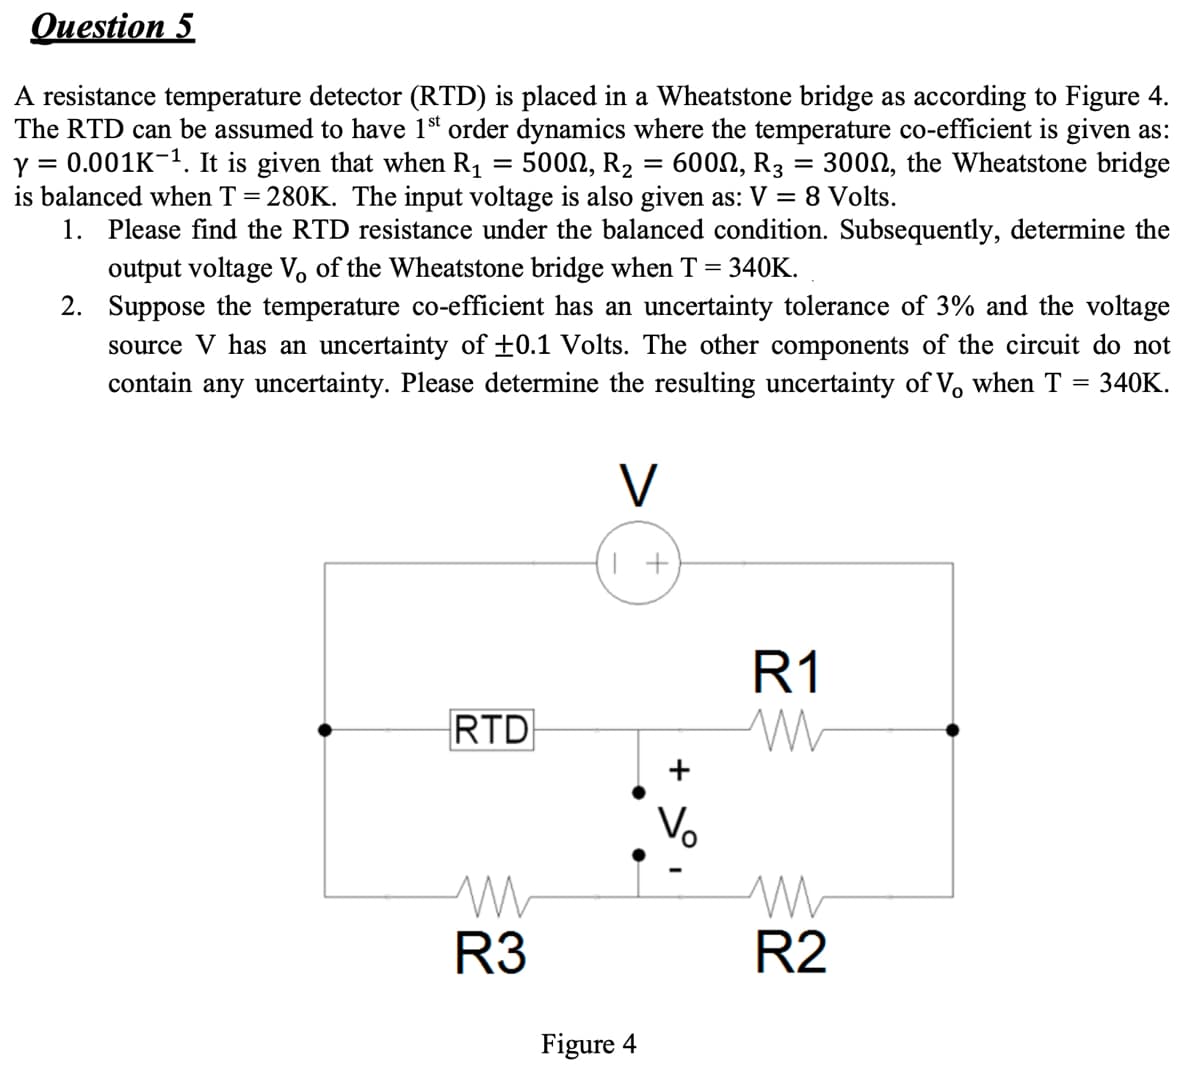 Question 5
A resistance temperature detector (RTD) is placed in a Wheatstone bridge as according to Figure 4.
The RTD can be assumed to have 1st order dynamics where the temperature co-efficient is given as:
Y 0.001K-1. It is given that when R₁ = 500M, R₂ = 600N, R3 = 3000, the Wheatstone bridge
is balanced when T = 280K. The input voltage is also given as: V = 8 Volts.
1. Please find the RTD resistance under the balanced condition. Subsequently, determine the
output voltage Vo of the Wheatstone bridge when T = 340K.
2.
Suppose the temperature co-efficient has an uncertainty tolerance of 3% and the voltage
source V has an uncertainty of ±0.1 Volts. The other components of the circuit do not
contain any uncertainty. Please determine the resulting uncertainty of V, when T = 340K.
RTD
M
R3
V
1 +
Figure 4
+
R1
M
M
R2